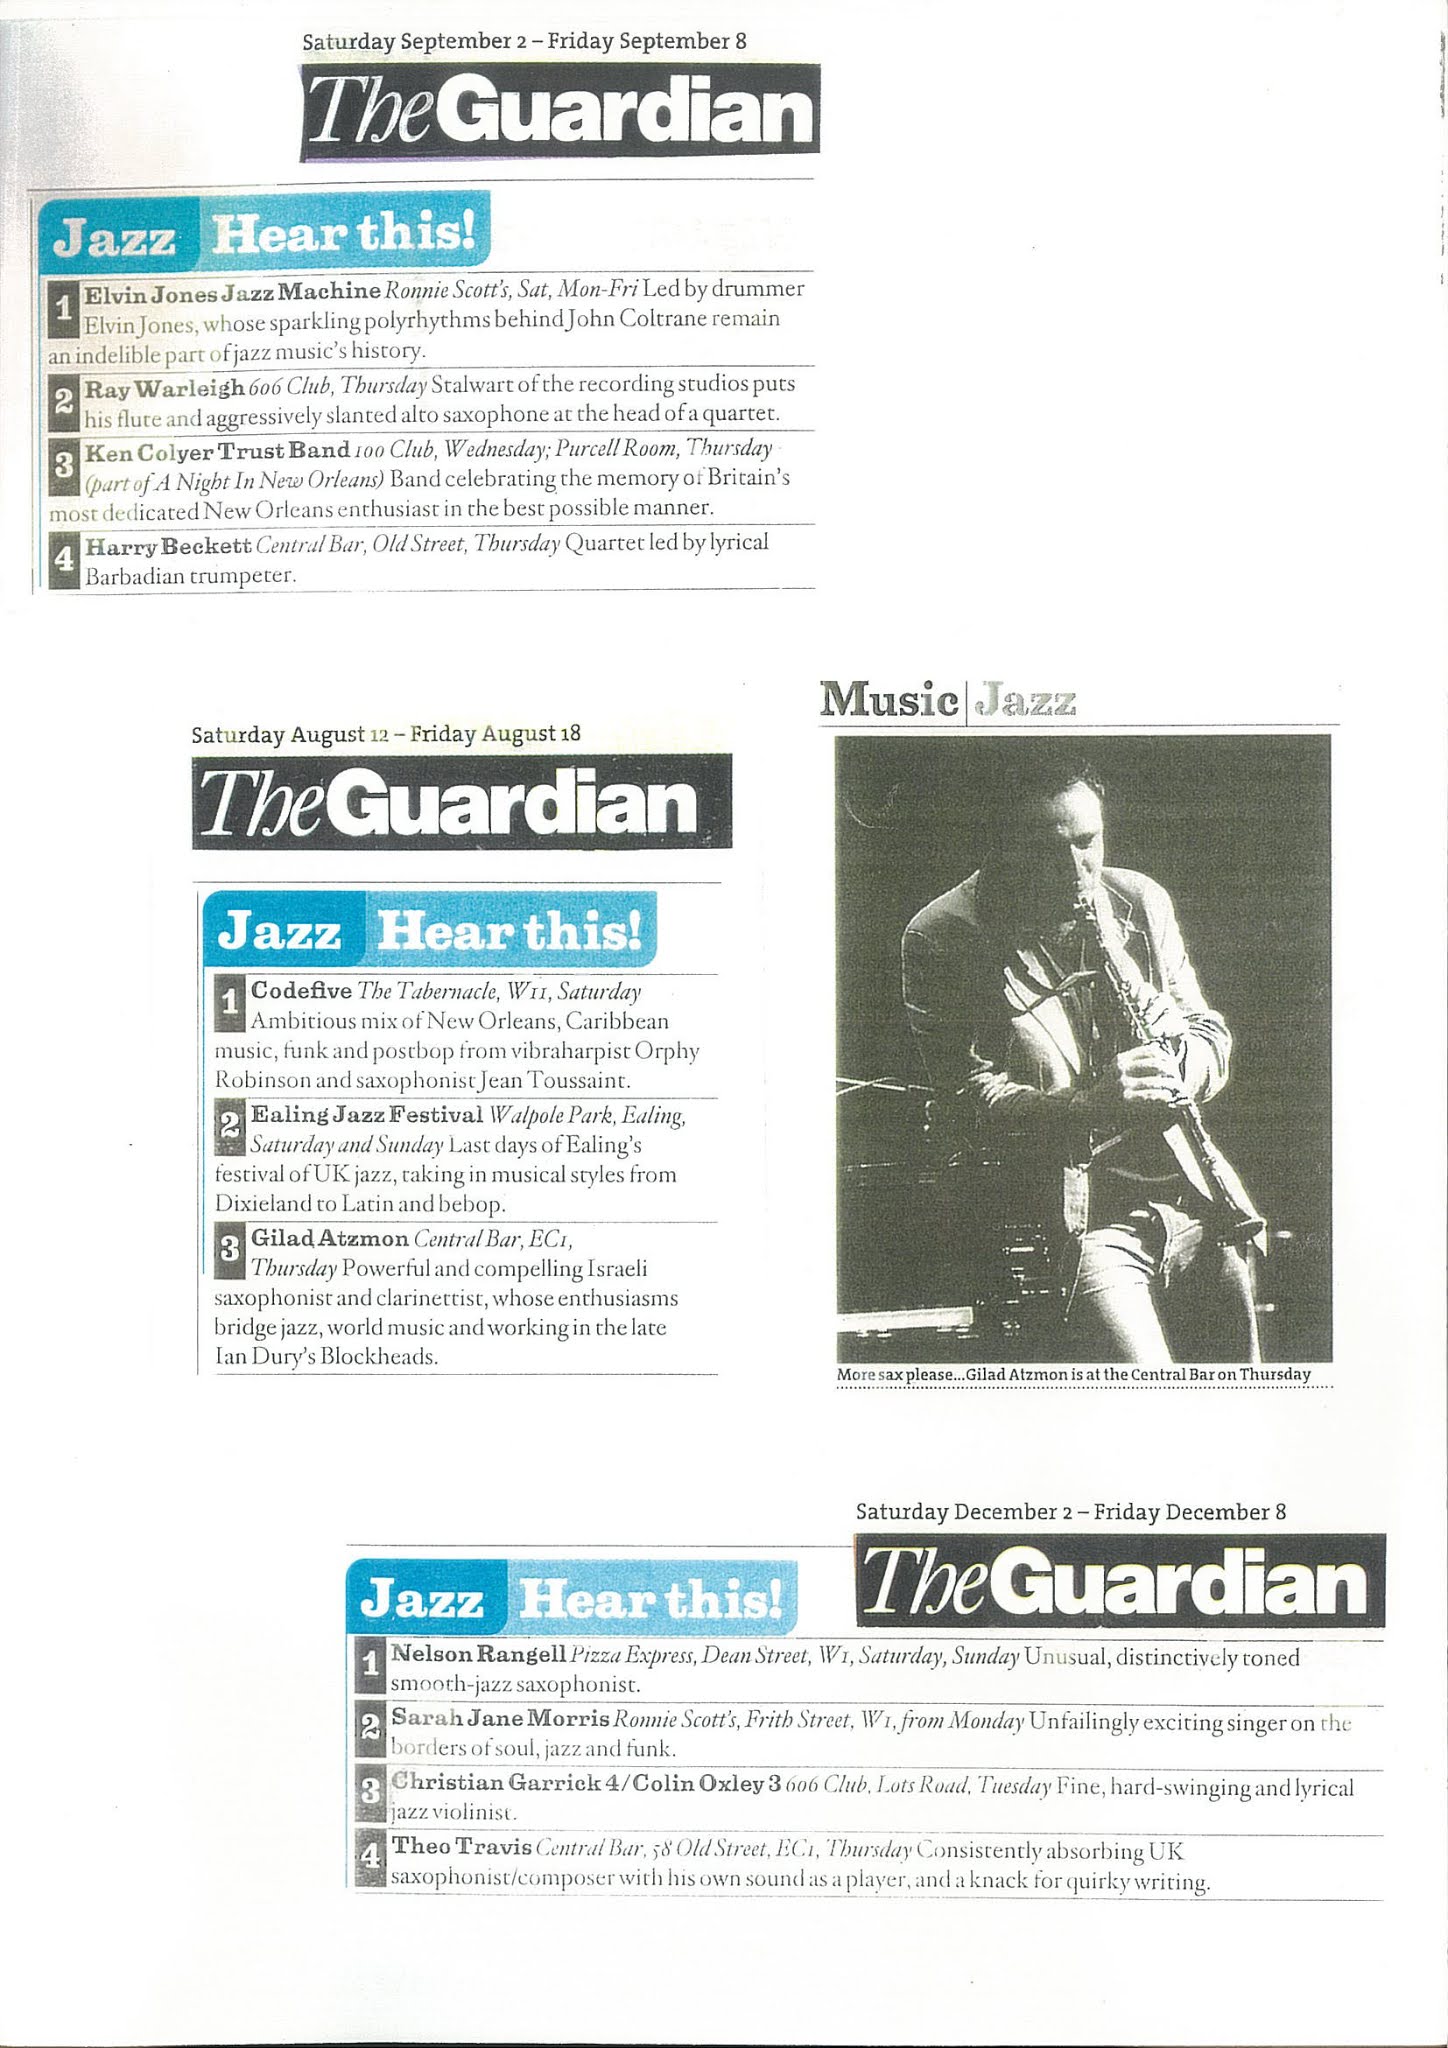 The Guardian Newspaper Reviews for Central Bar Jazz Club. Promoter and Booker Flavia Brilli